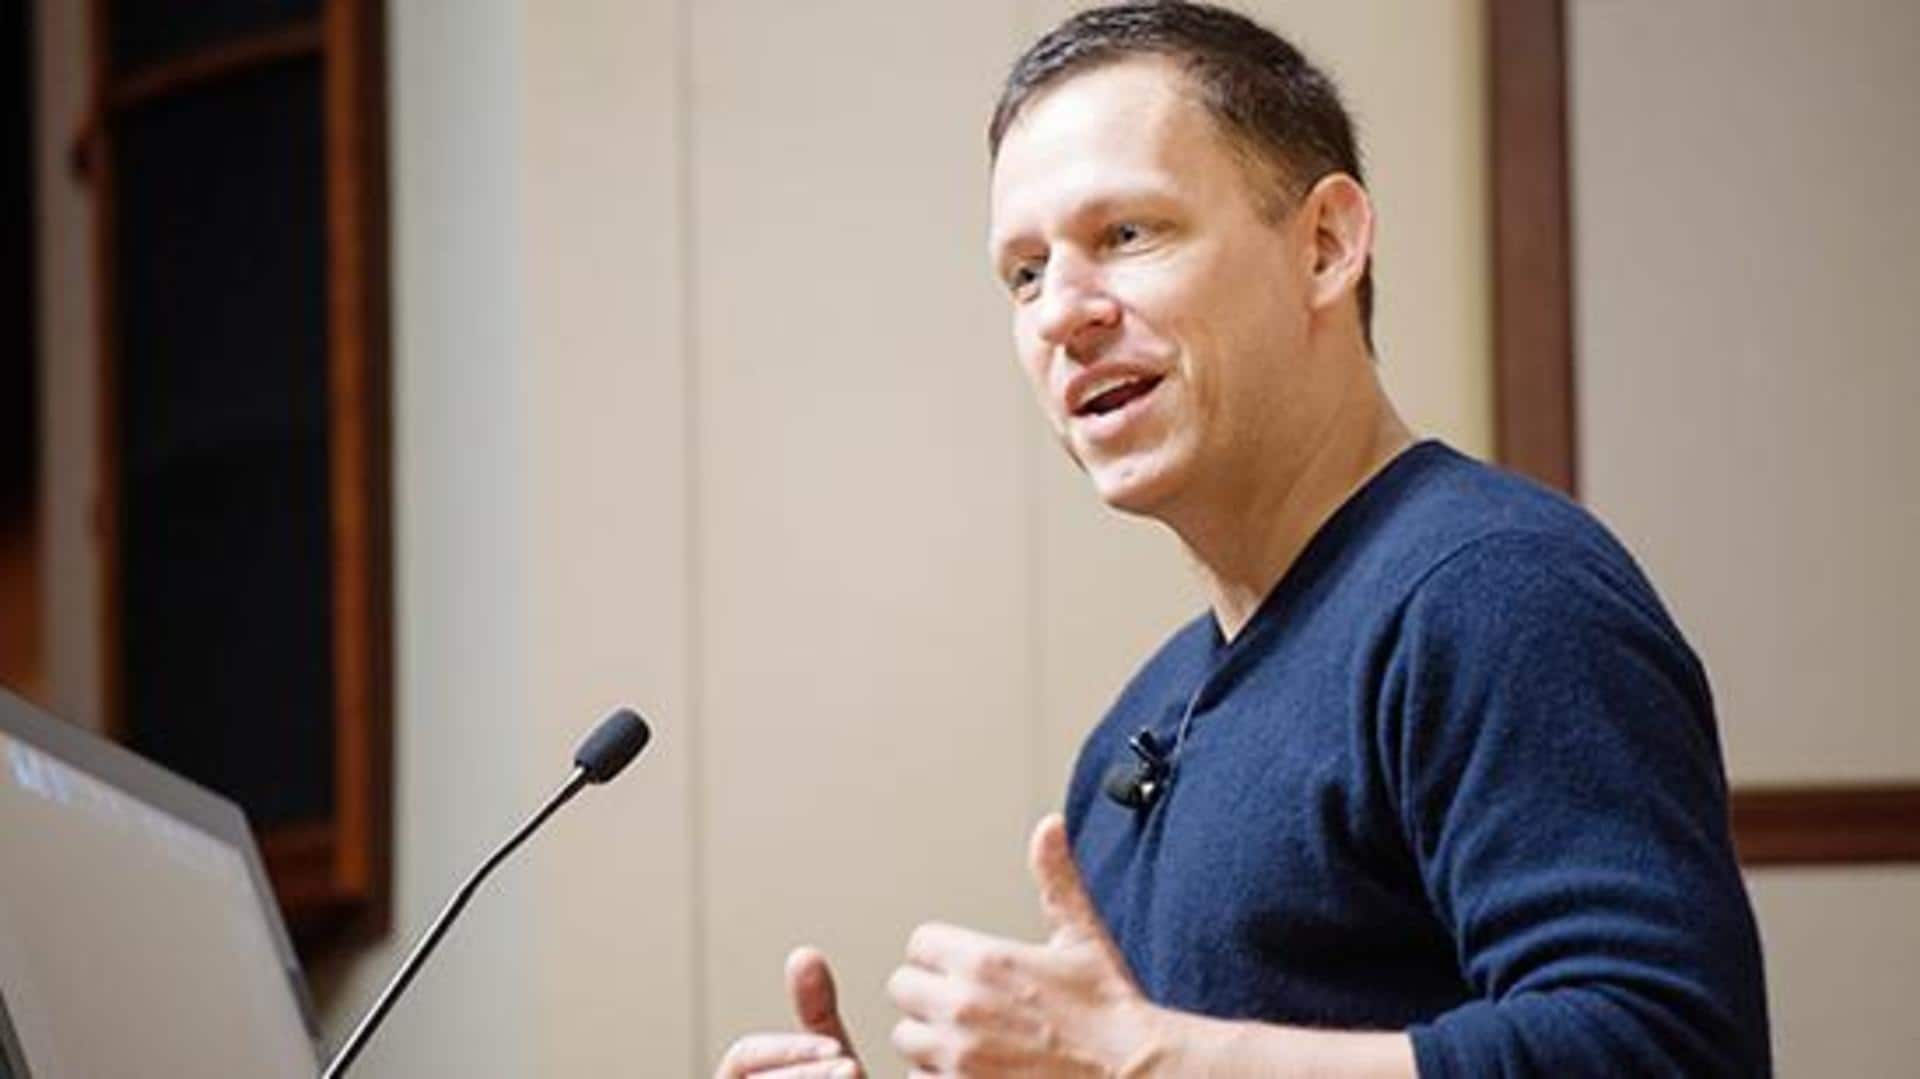 PayPal co-founder Peter Thiel seeks cryonic preservation. What is it?